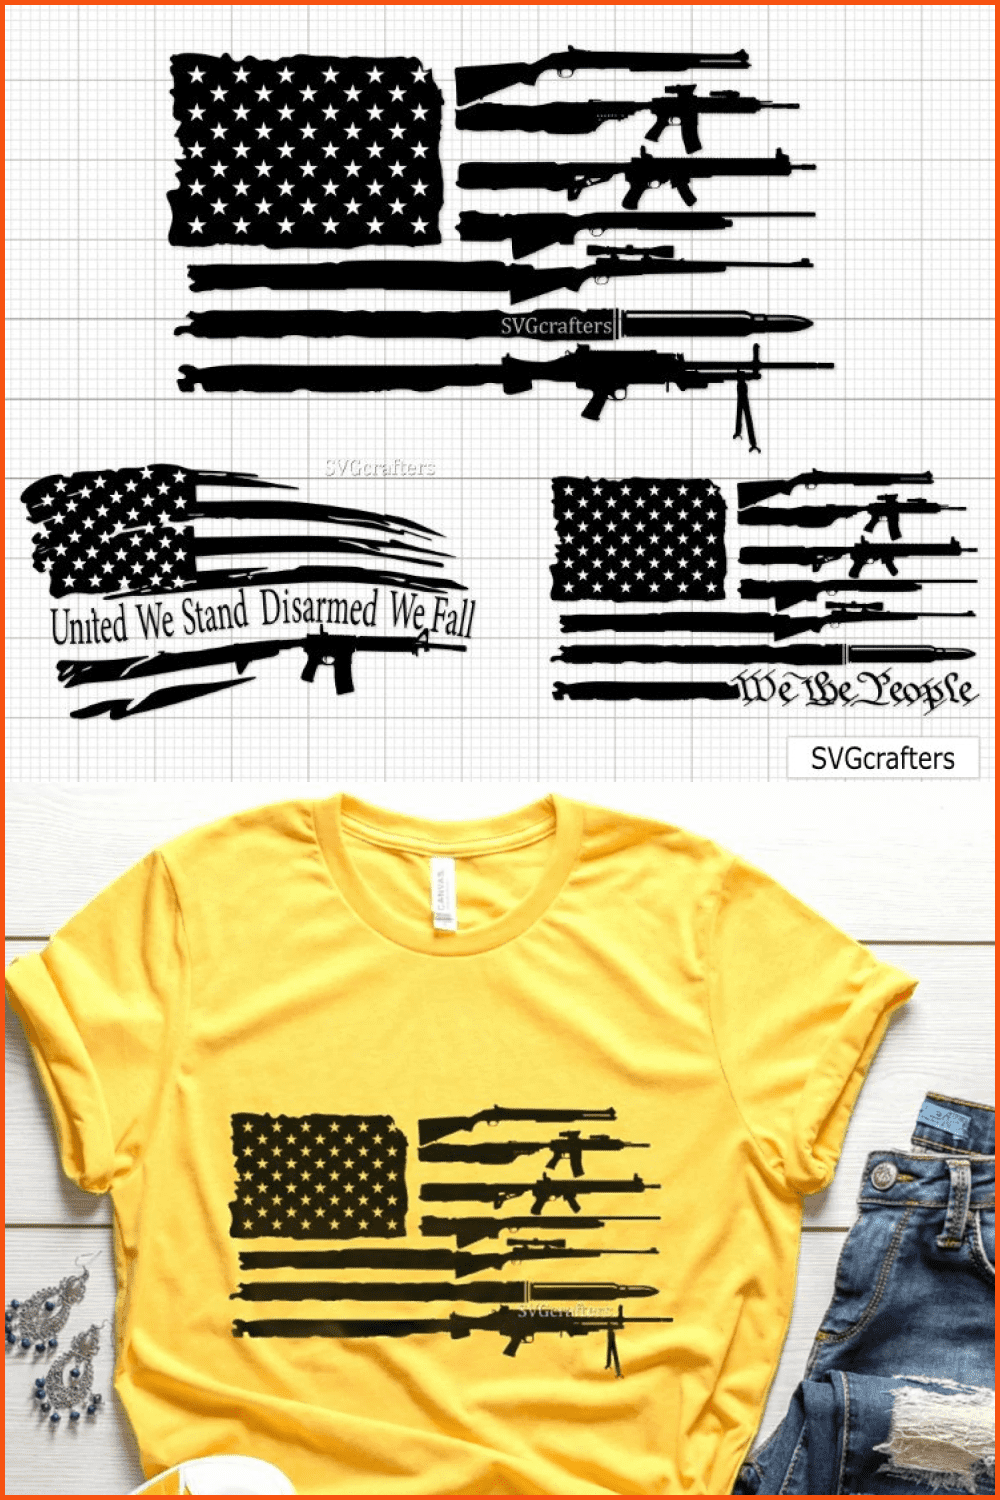 Collage of images of the American flag with rifles instead of stripes.